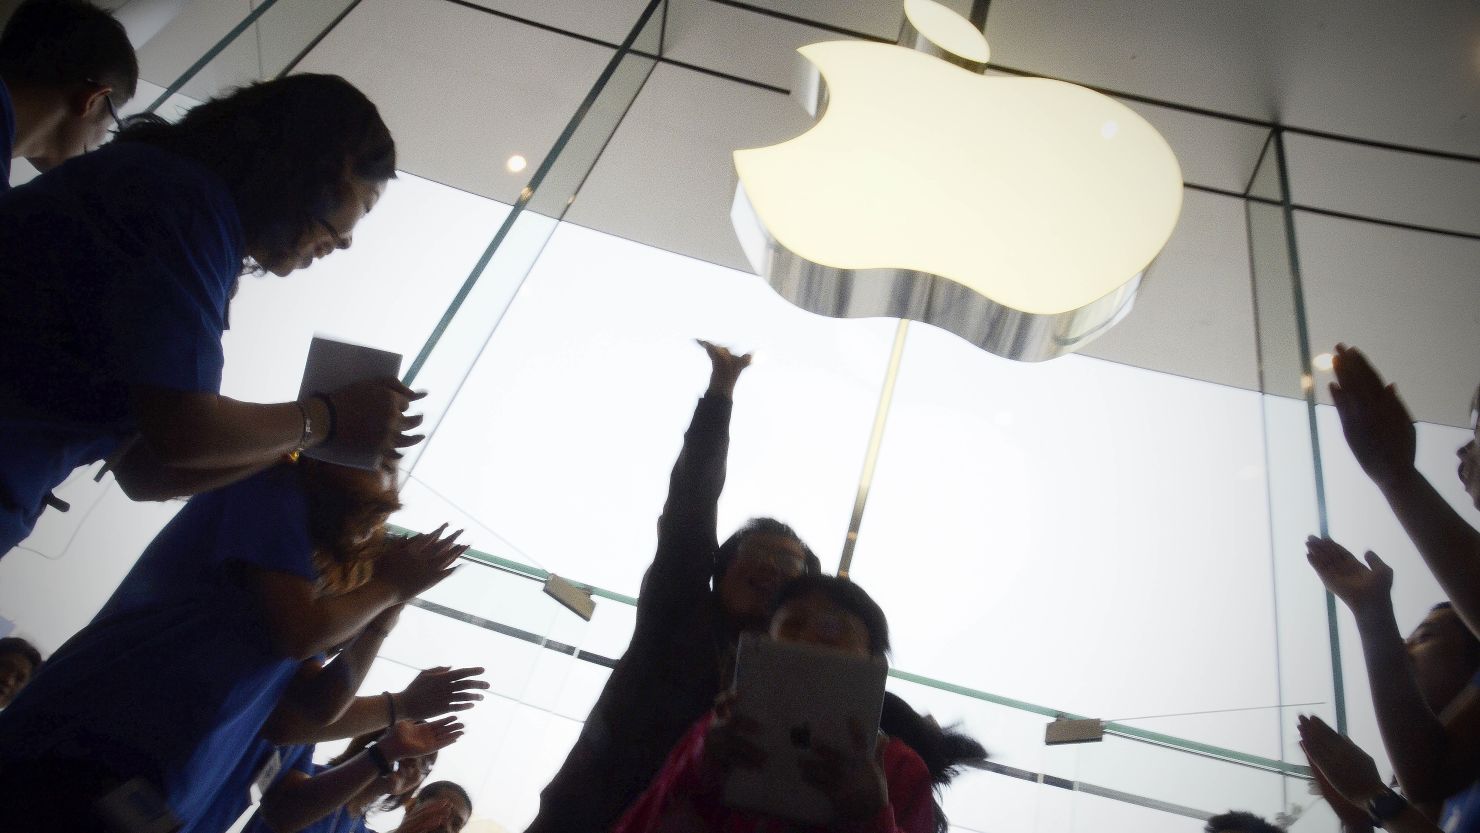 Apple staff welcoming customers in the new Apple store at WangFujin business district in Beijing on October 20, 2012. 